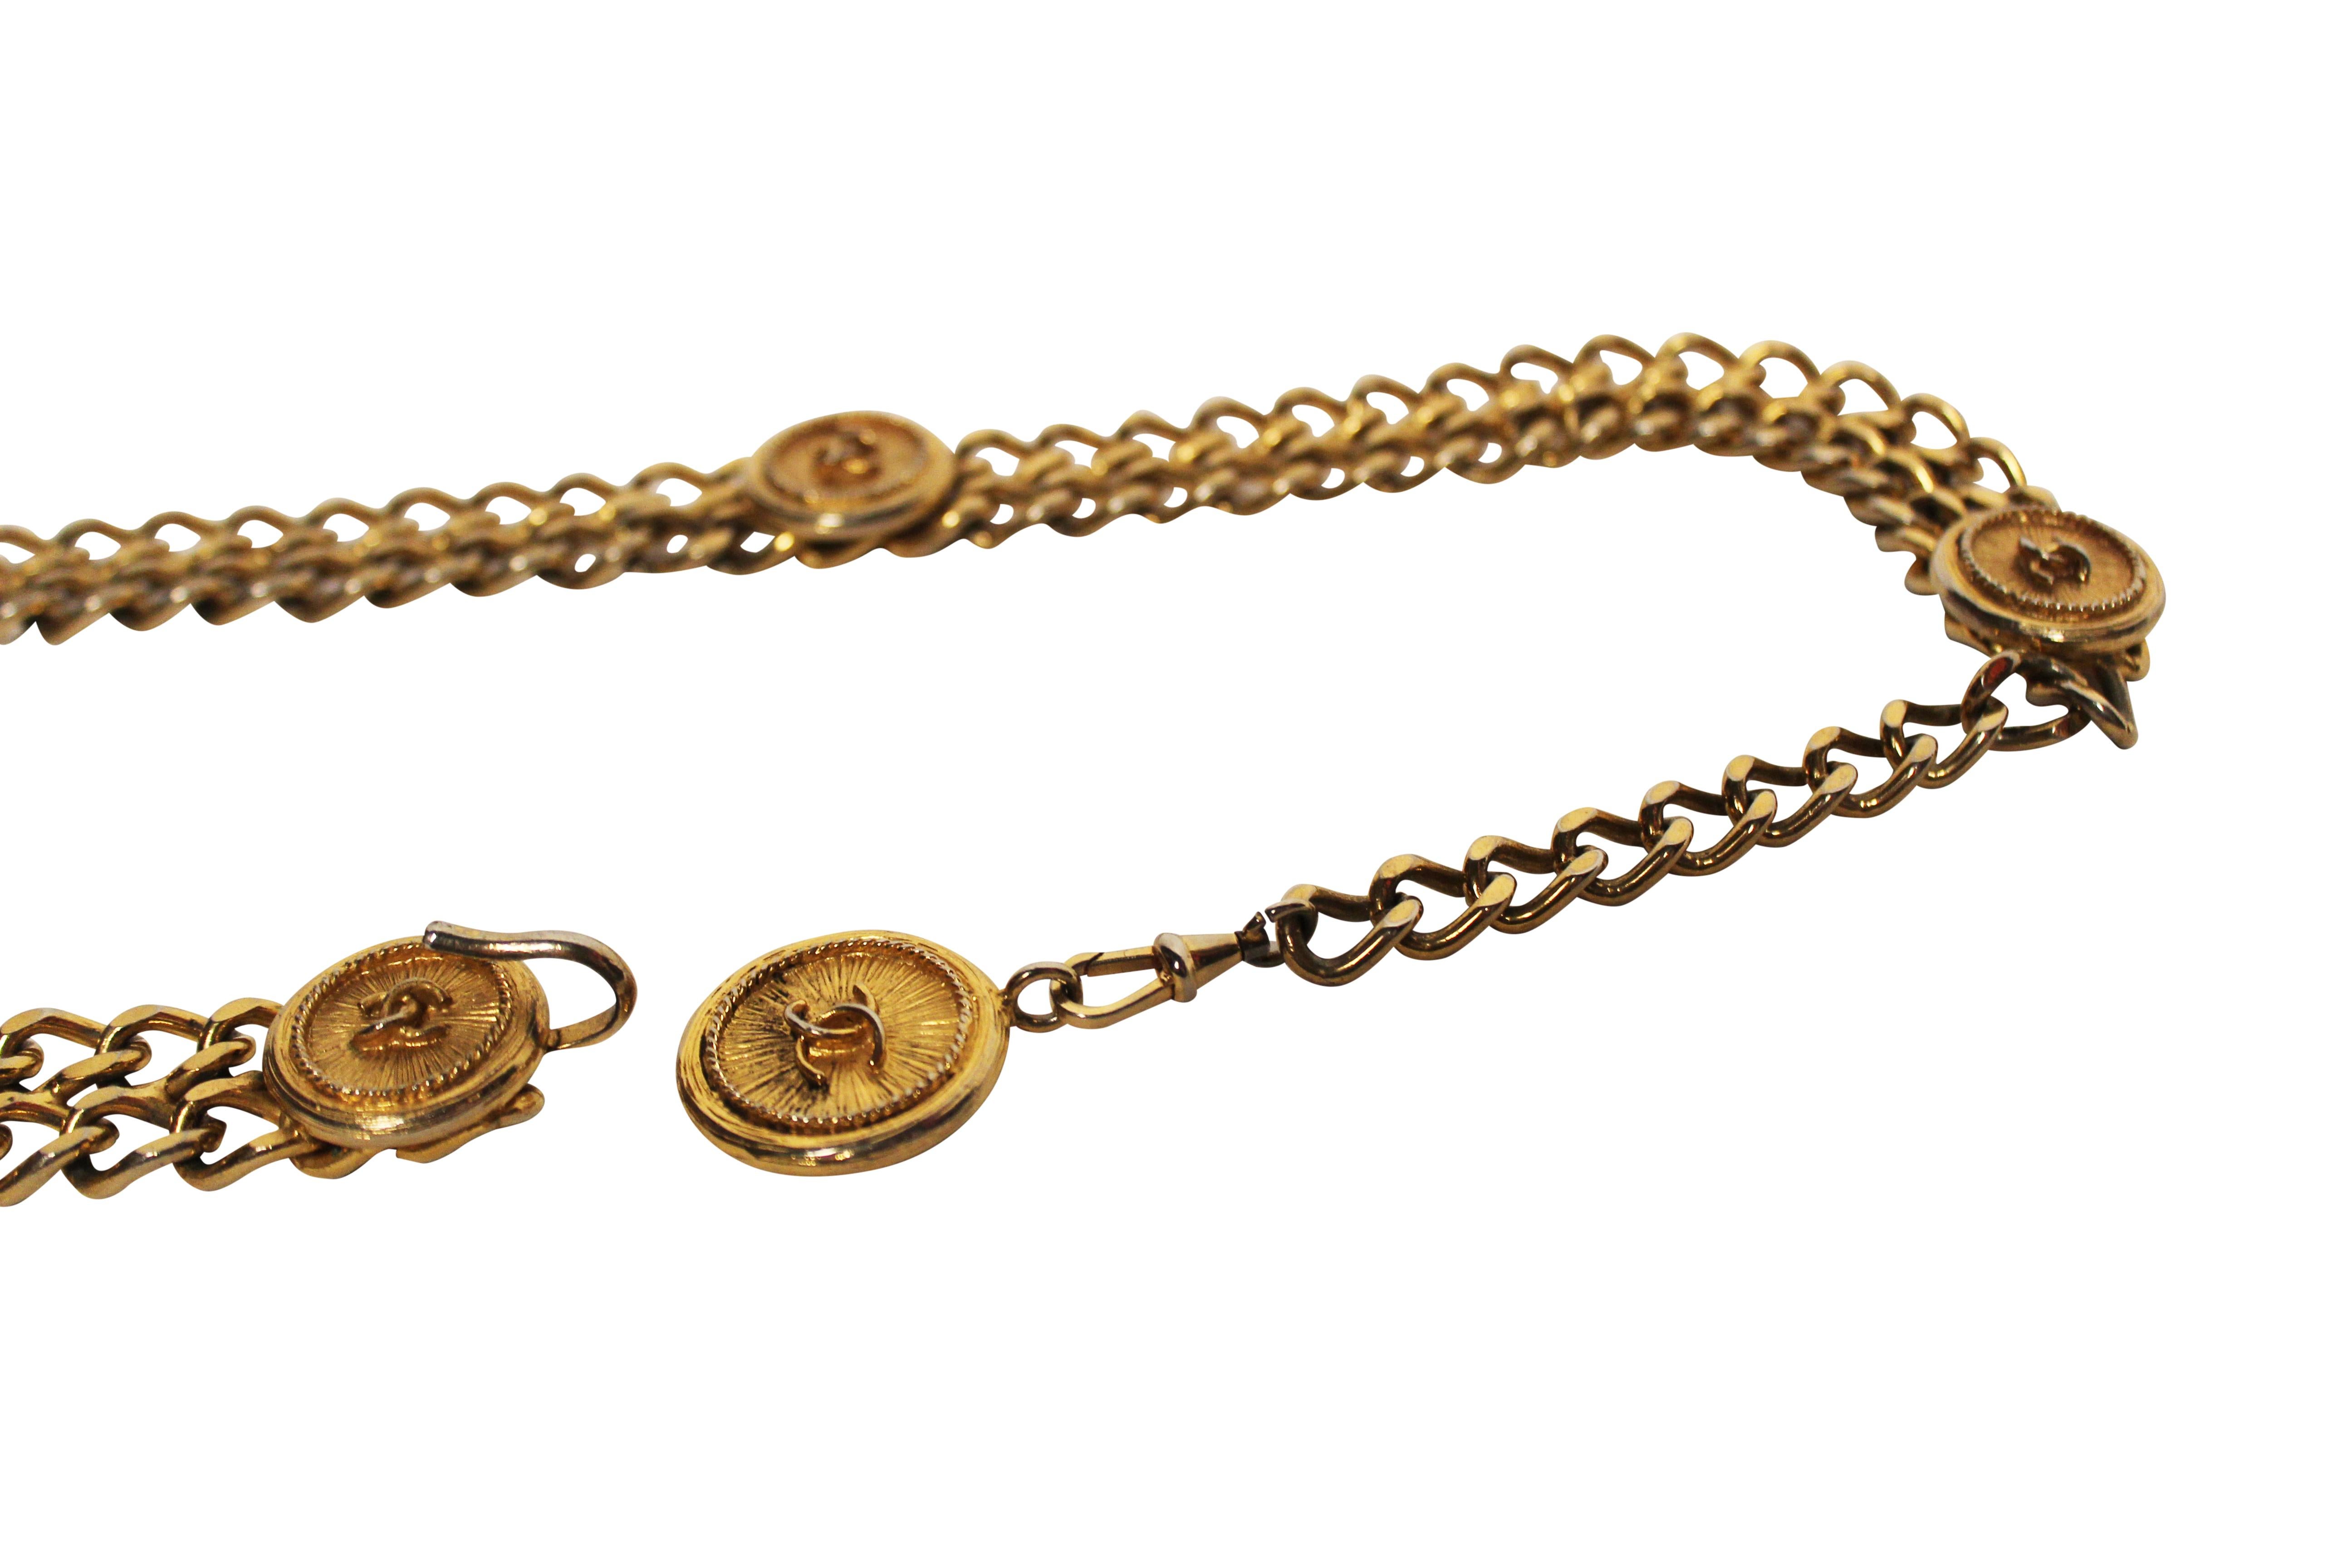 Rare 1980's gold toned CHANEL double chain belt with hook fastner. This iconic vintage piece features five CHANEL CC medallions, as well as one four leaf clover medallion. Signed CHANEL on clasp.

Total length 76cm but can be hooked to fit any